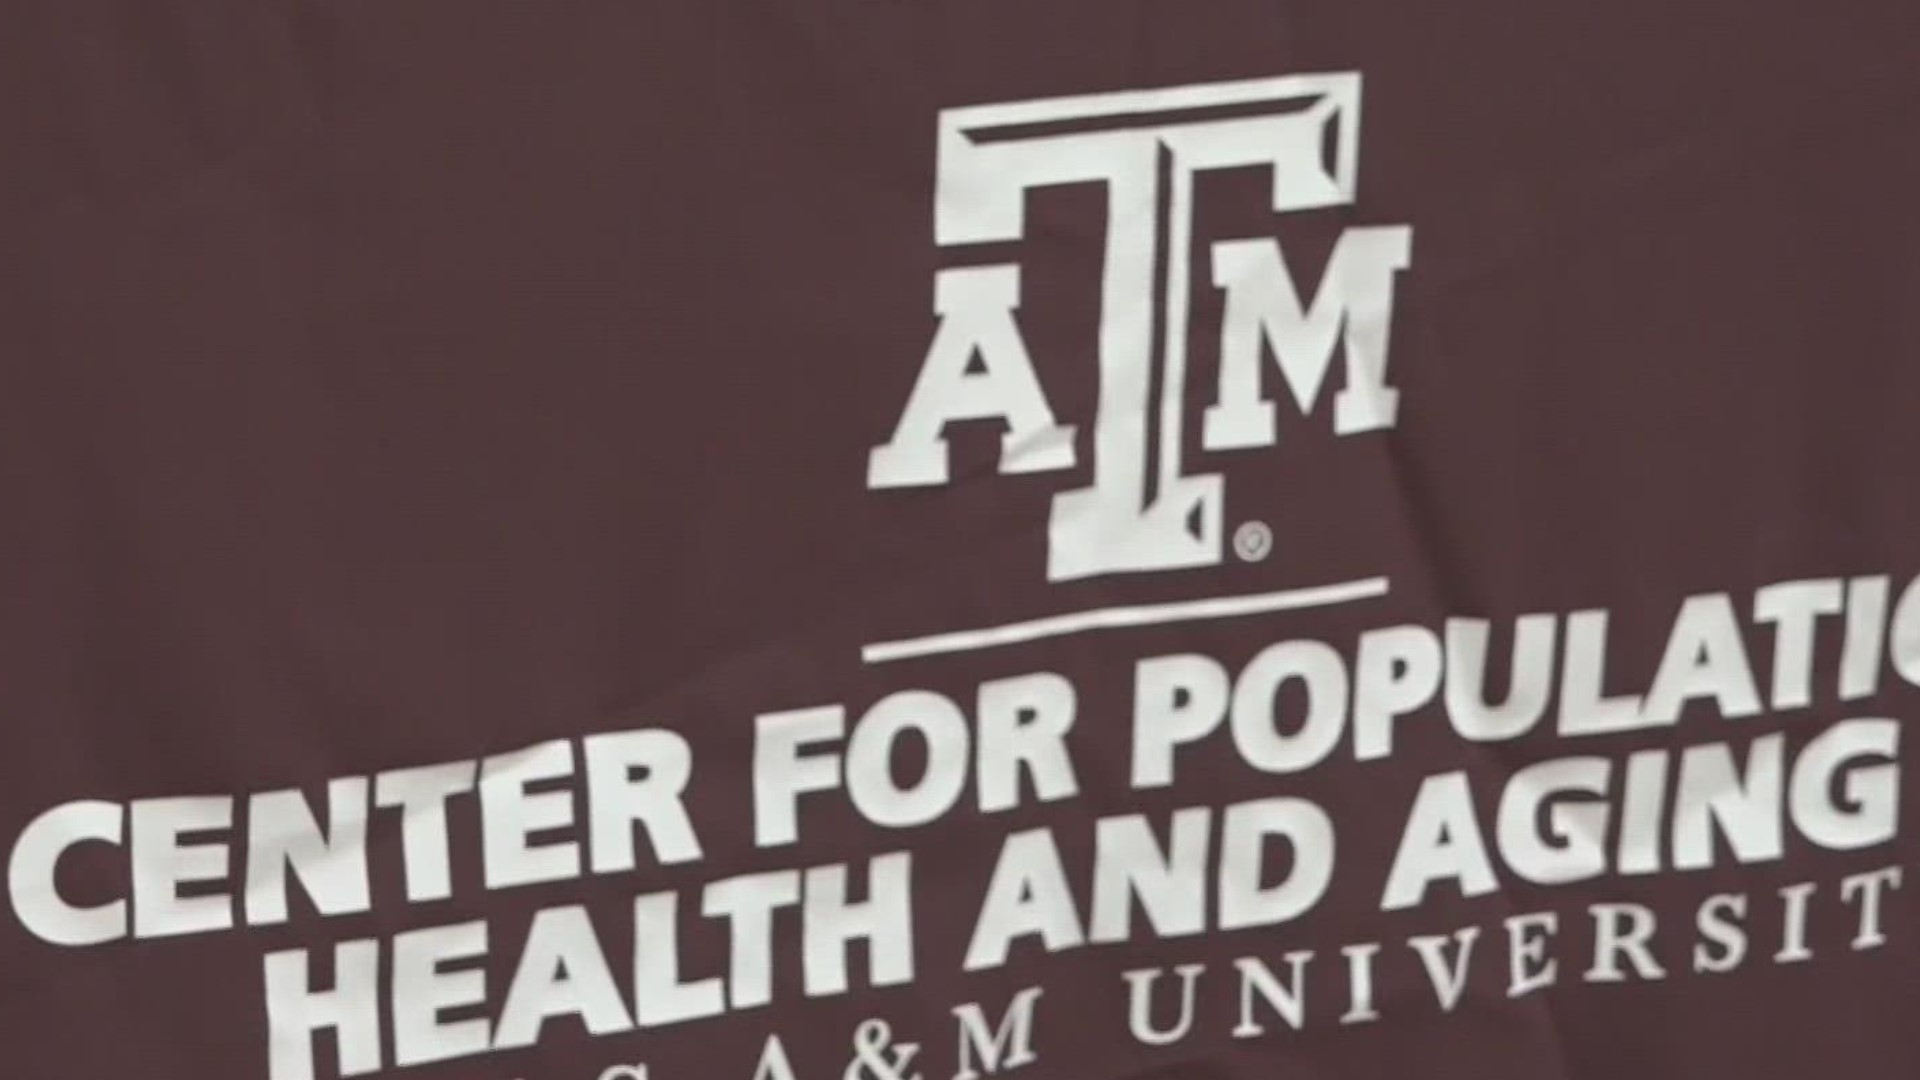 With the help of its partners, the Texas A&M School of Public Health hosts a vaccine clinic and information seminar to educate the public on vaccines